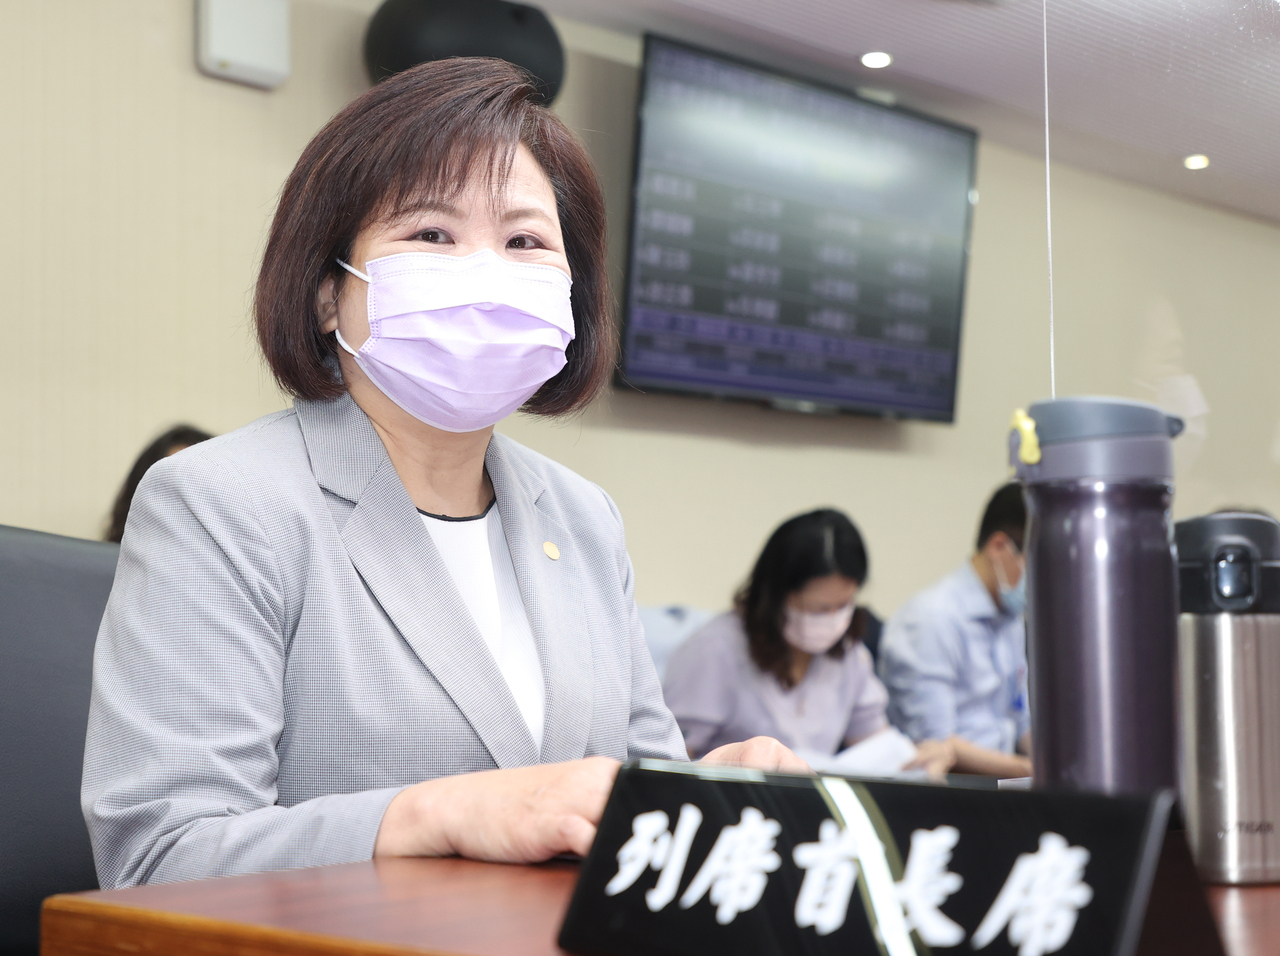 The Minister of Labor stated that those who have been fully vaccinated have priority to enter Taiwan. (Photo / Provided by the Ministry of Labor)